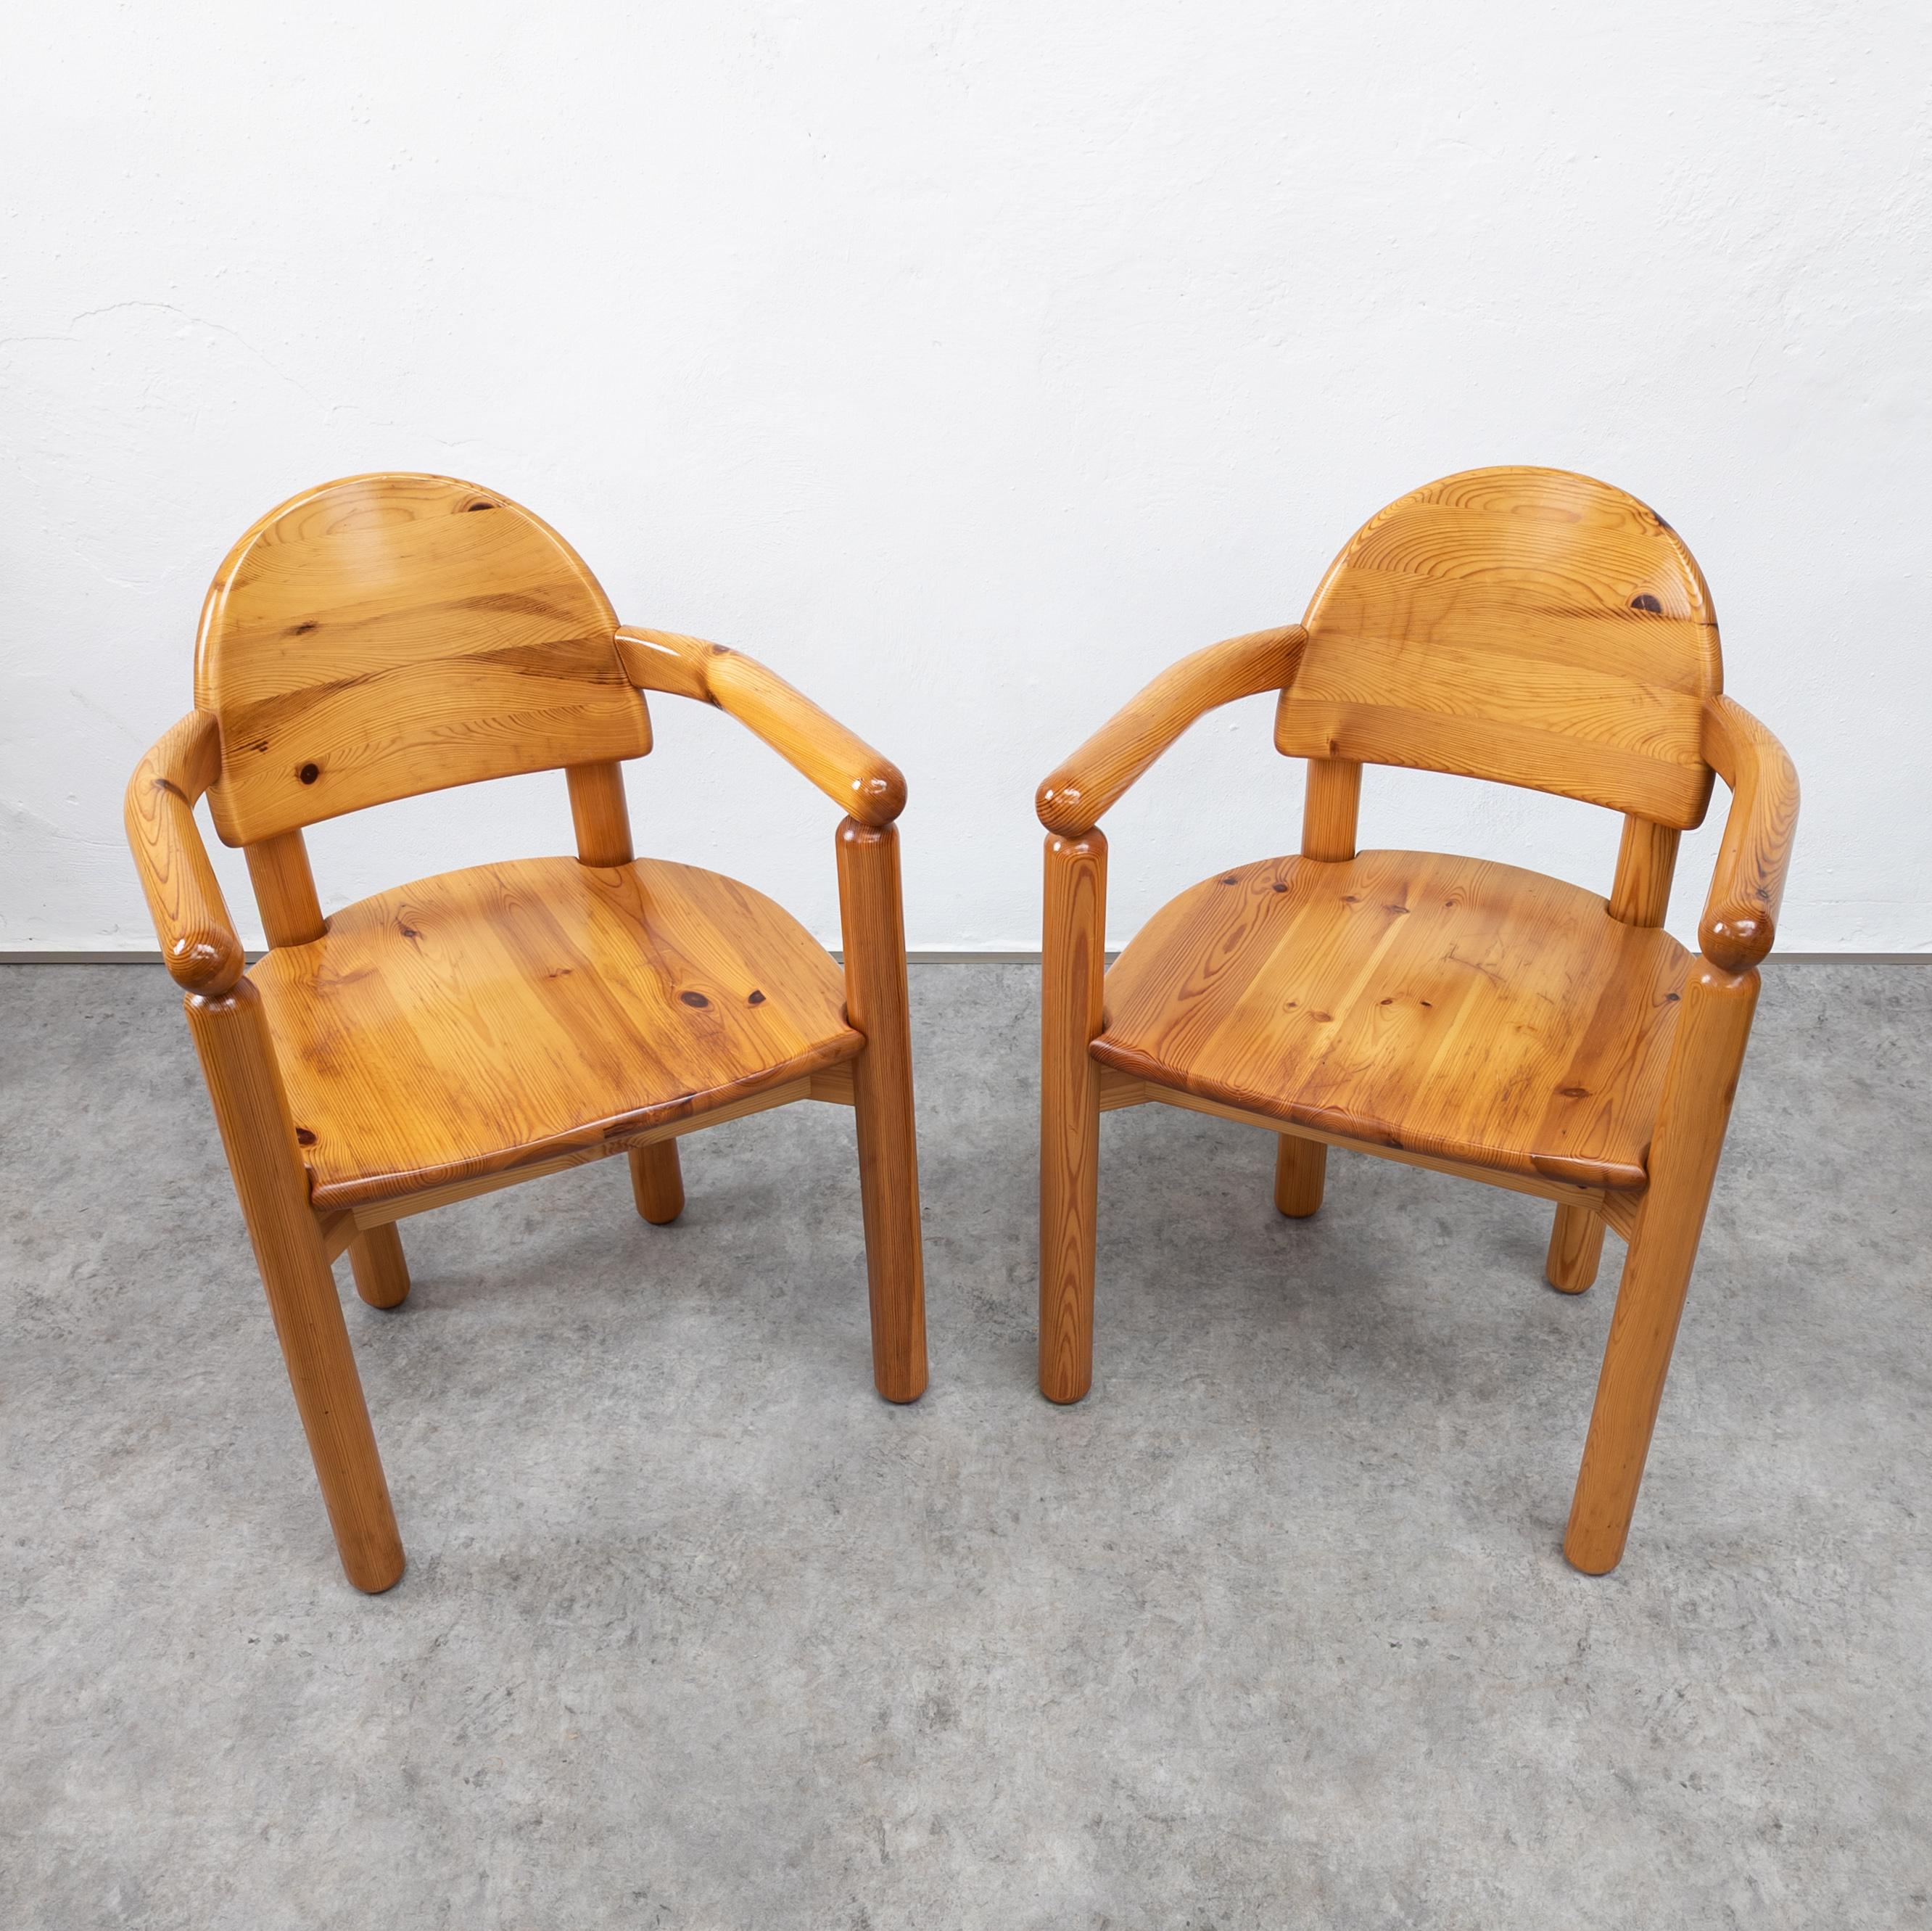 Late 20th Century Pair of Vintage Pine Chairs by Rainer Daumiller for Hirtshals Sawmill, Denmark 1